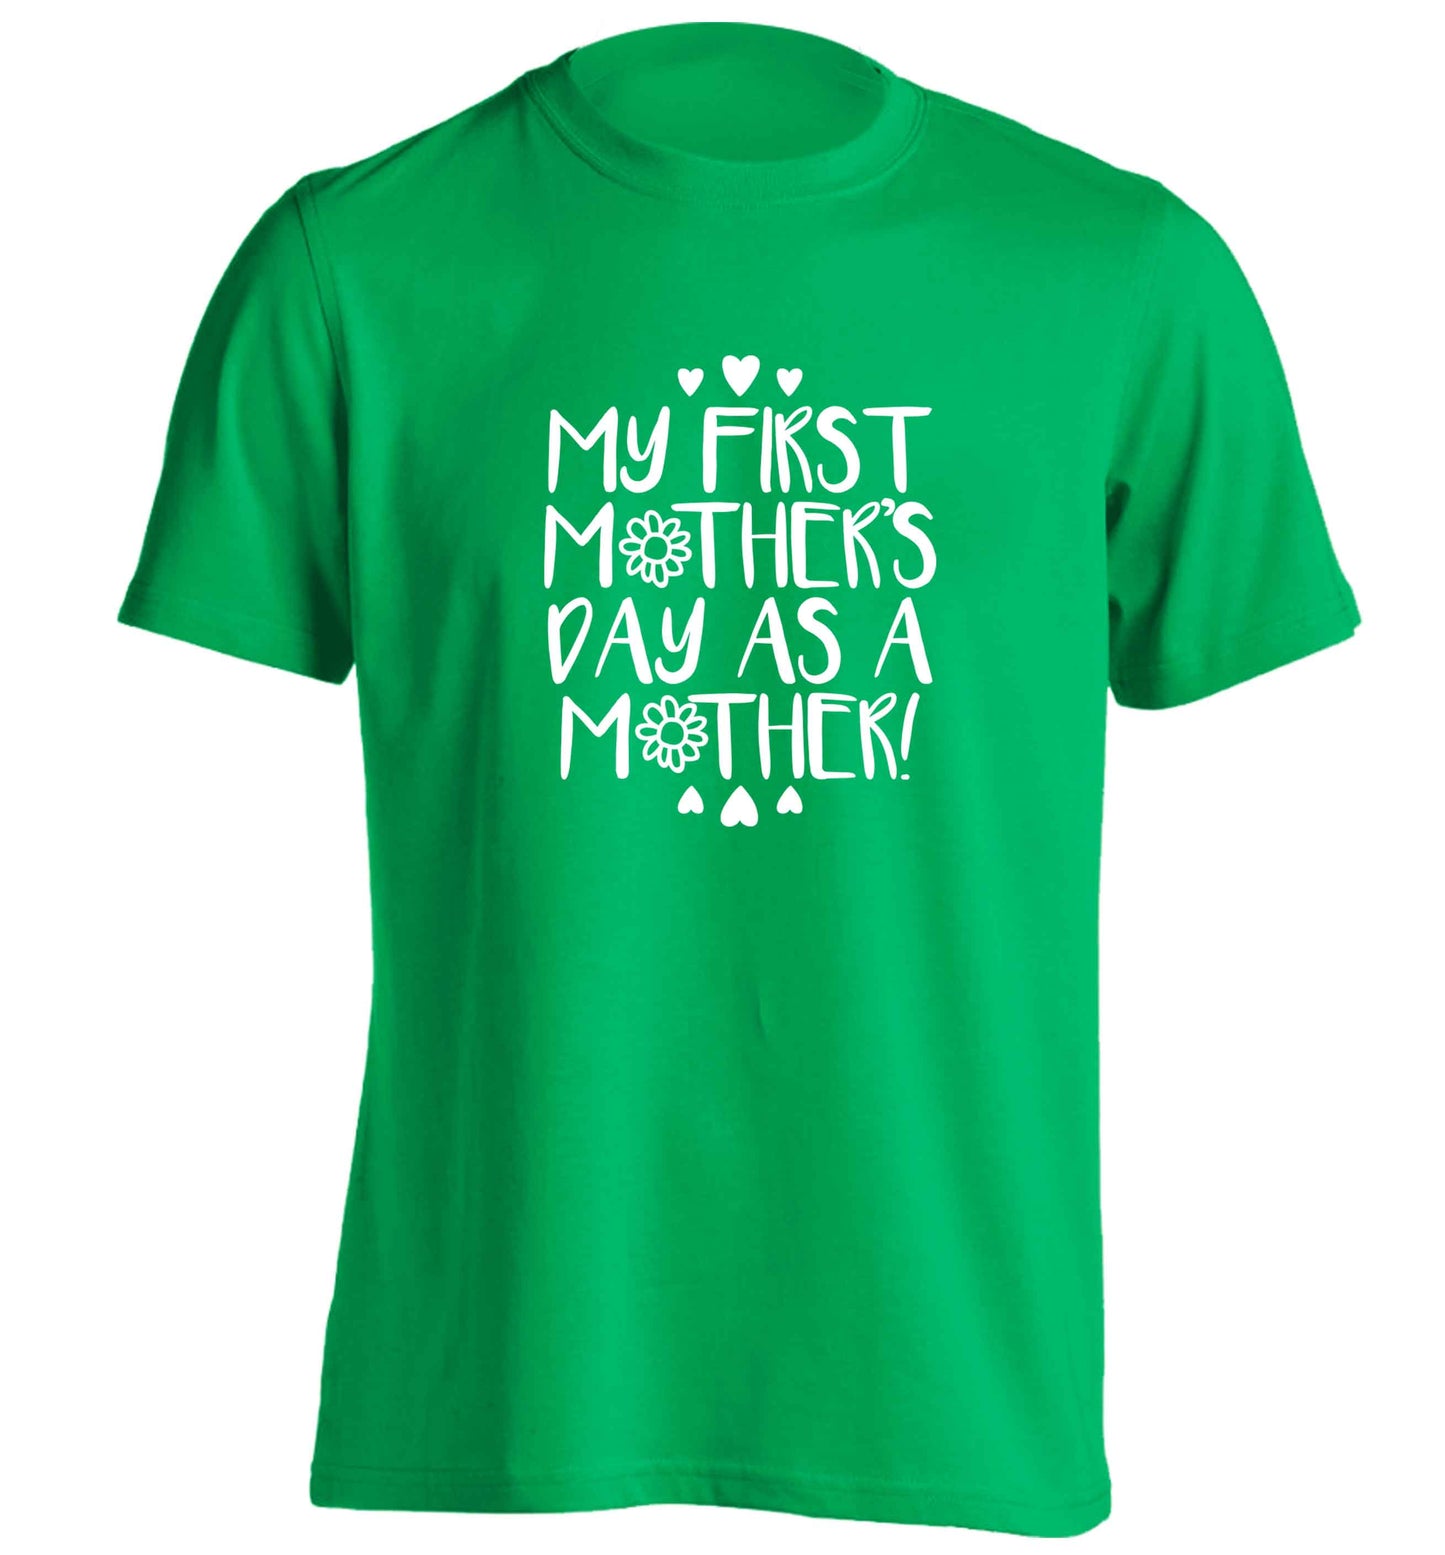 It's my first mother's day as a mother adults unisex green Tshirt 2XL